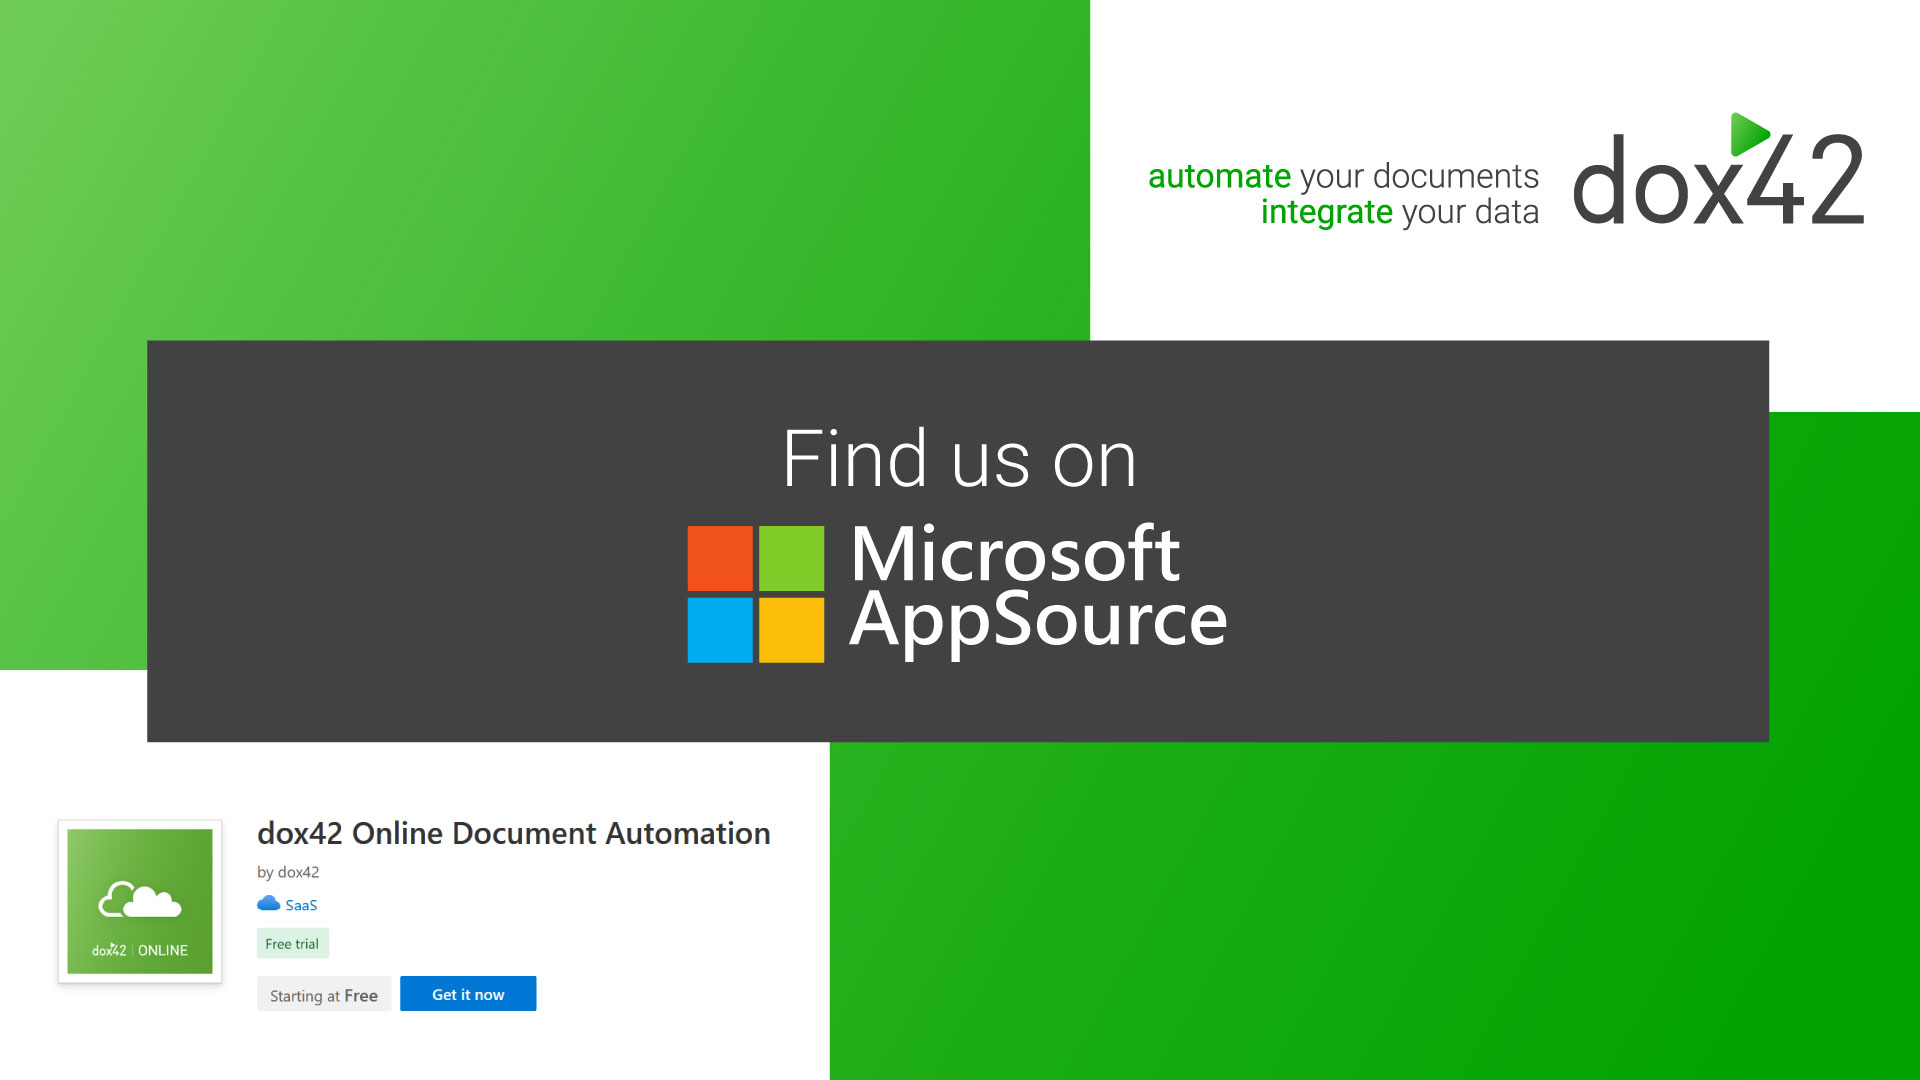  dox42 Online Now Available on Microsoft AppSource